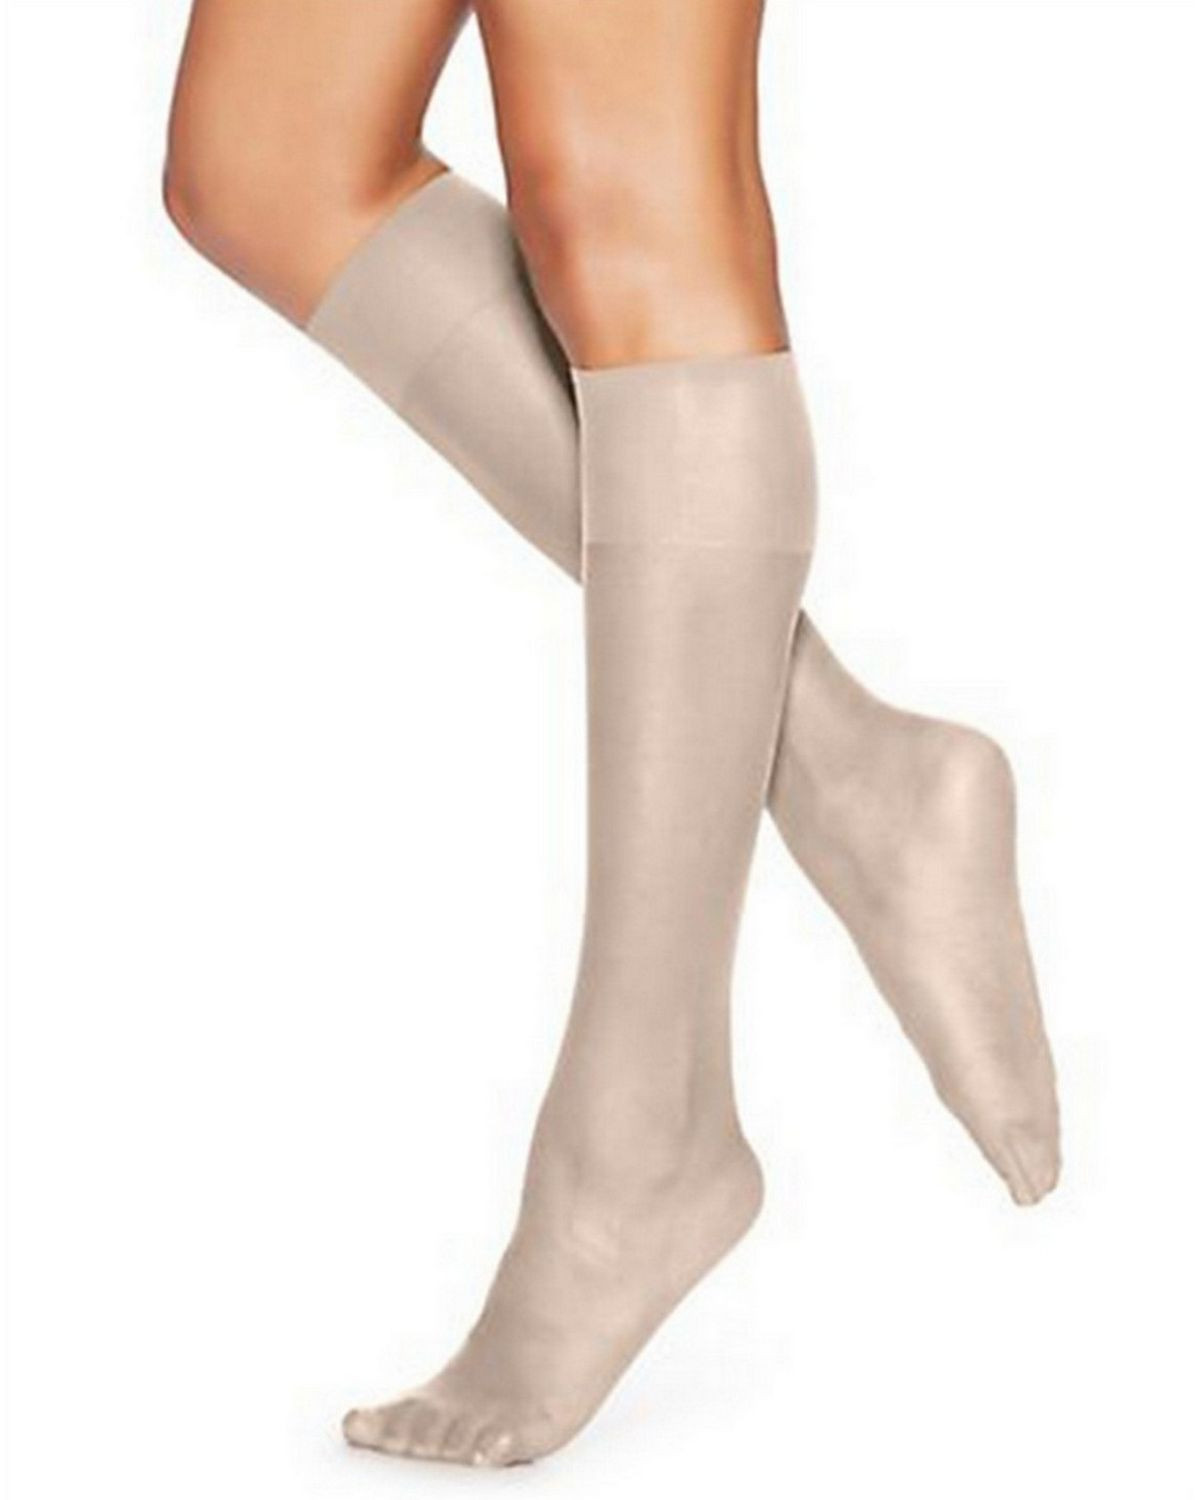 Hanes 725 Women's Silk Reflections Silky Sheer Knee Highs 2-Pack - Pearl - One Size #silk